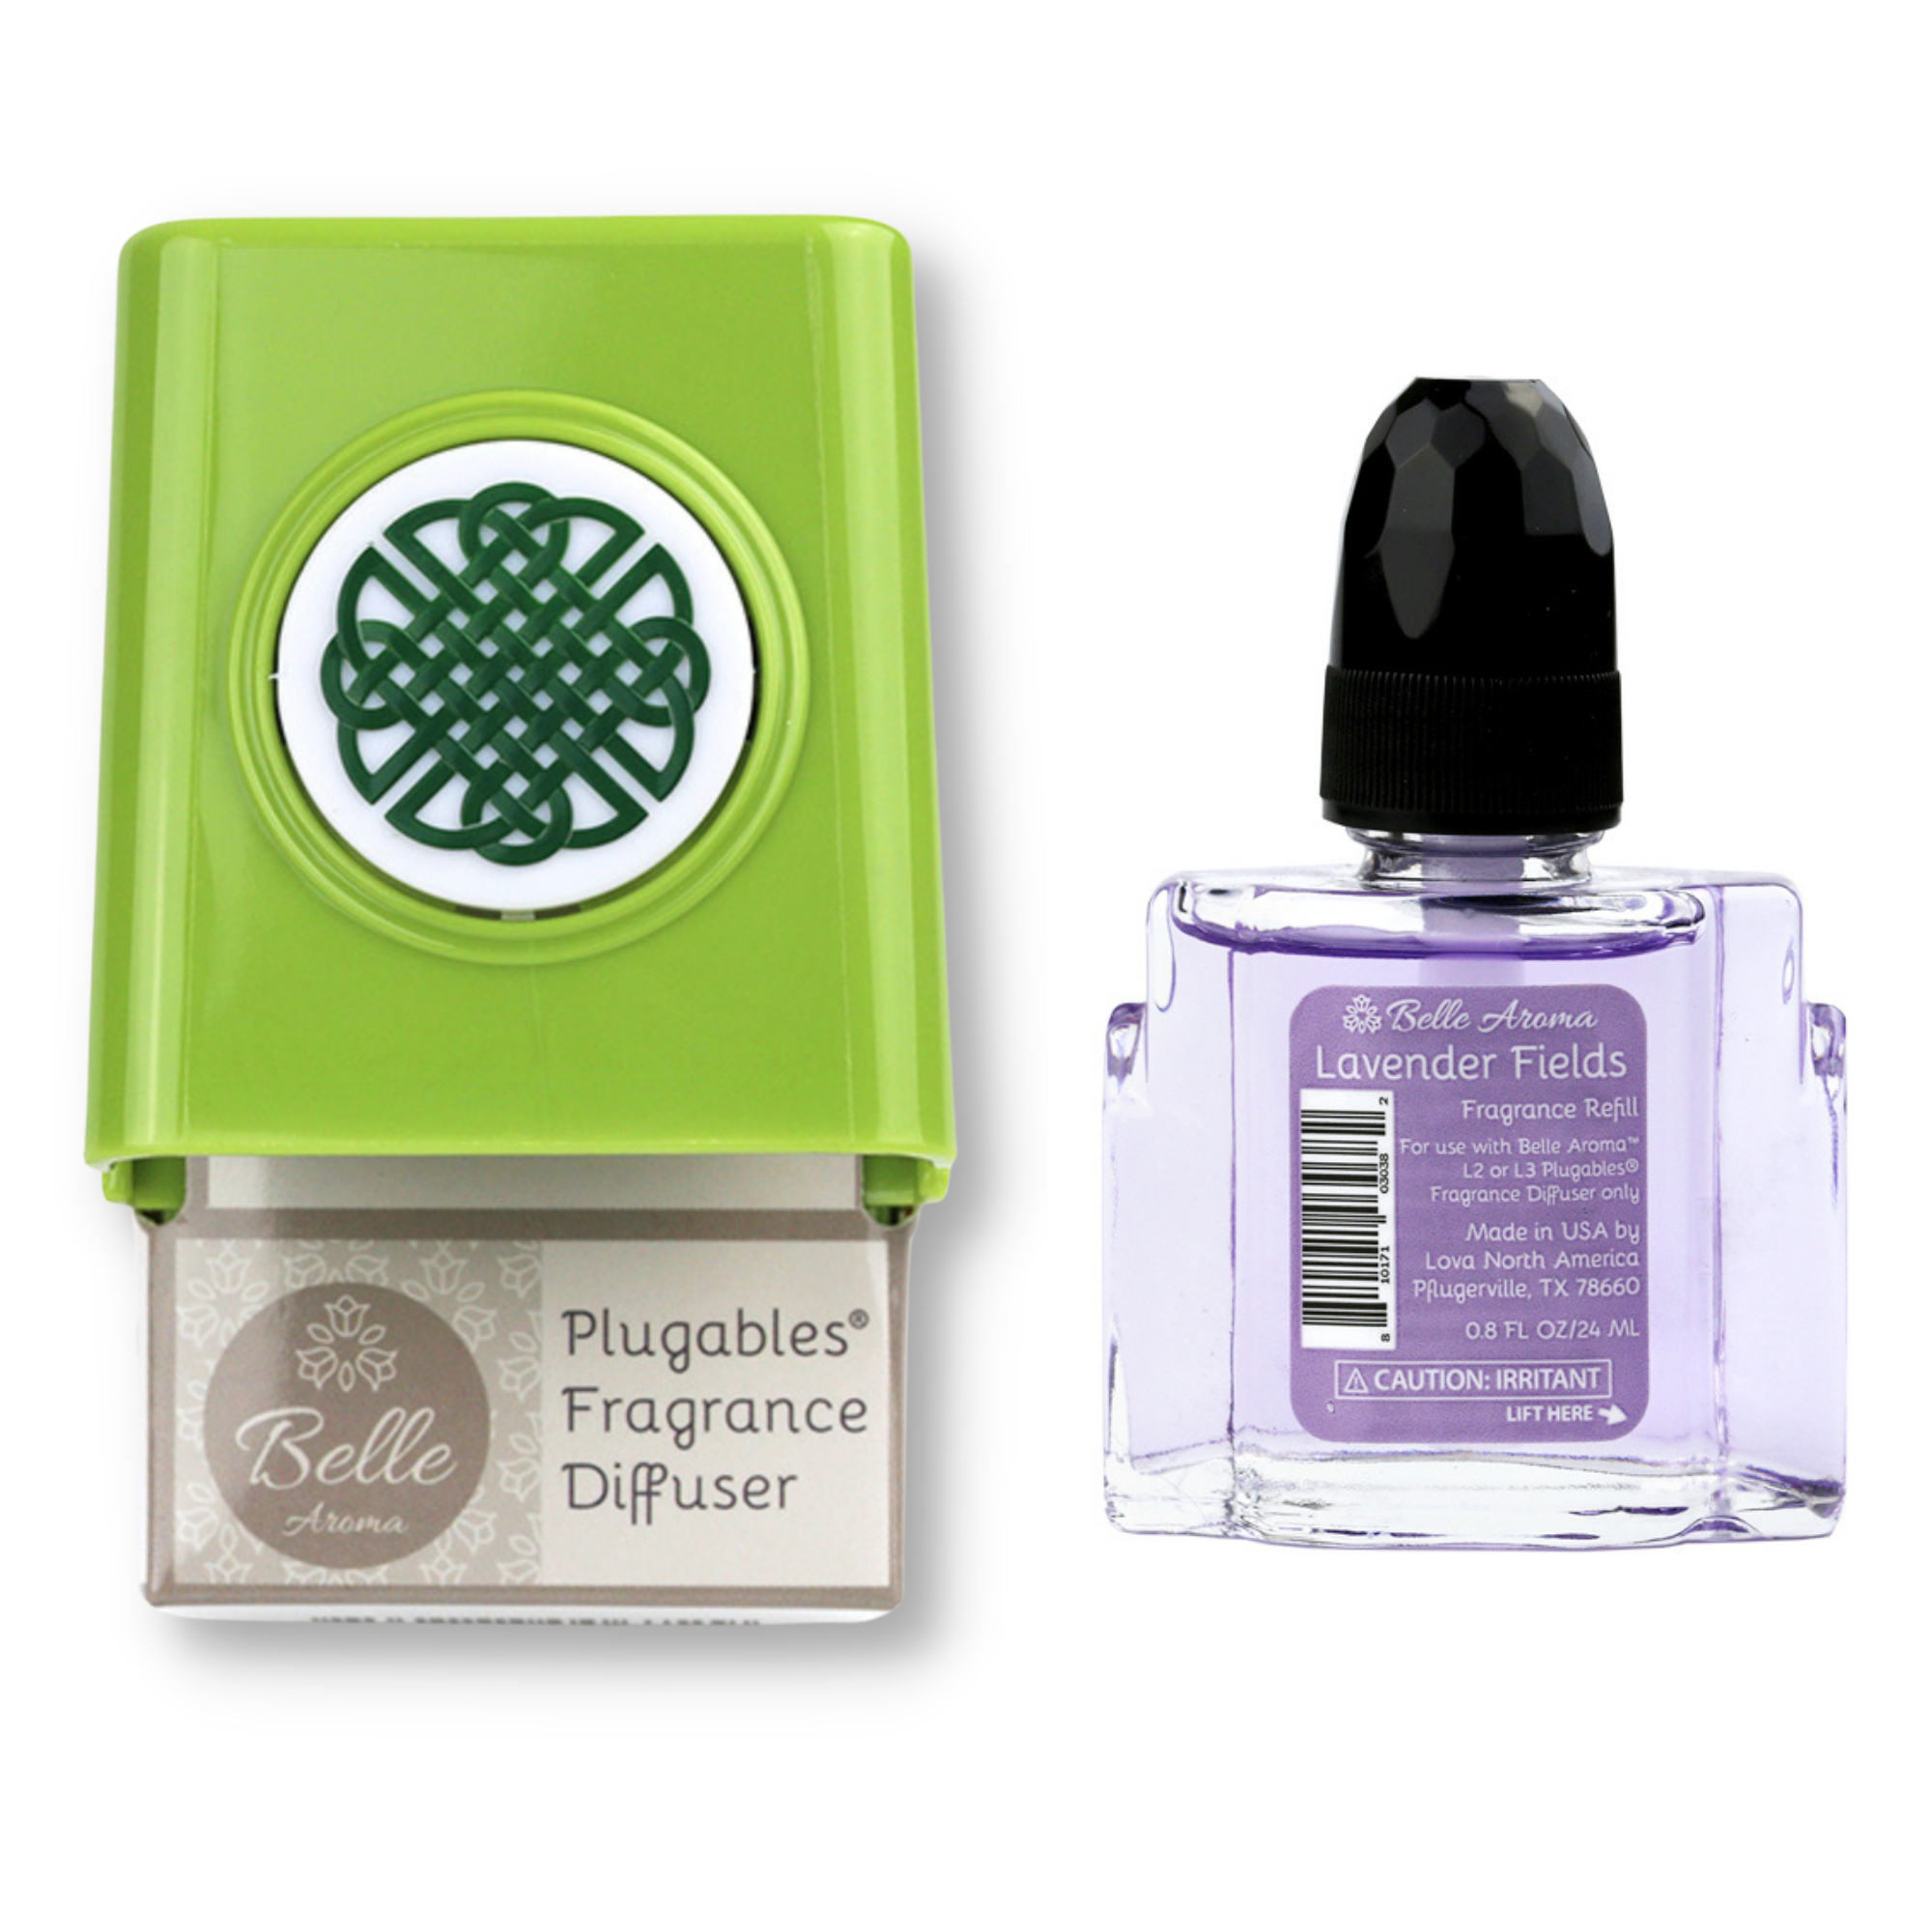 Celtic Knot Medallion Plugables® Plugin Electric Scented Oil Diffuser - Granny Smith with Lavender Fields Fragrance Oil Home Fragrance Accessories